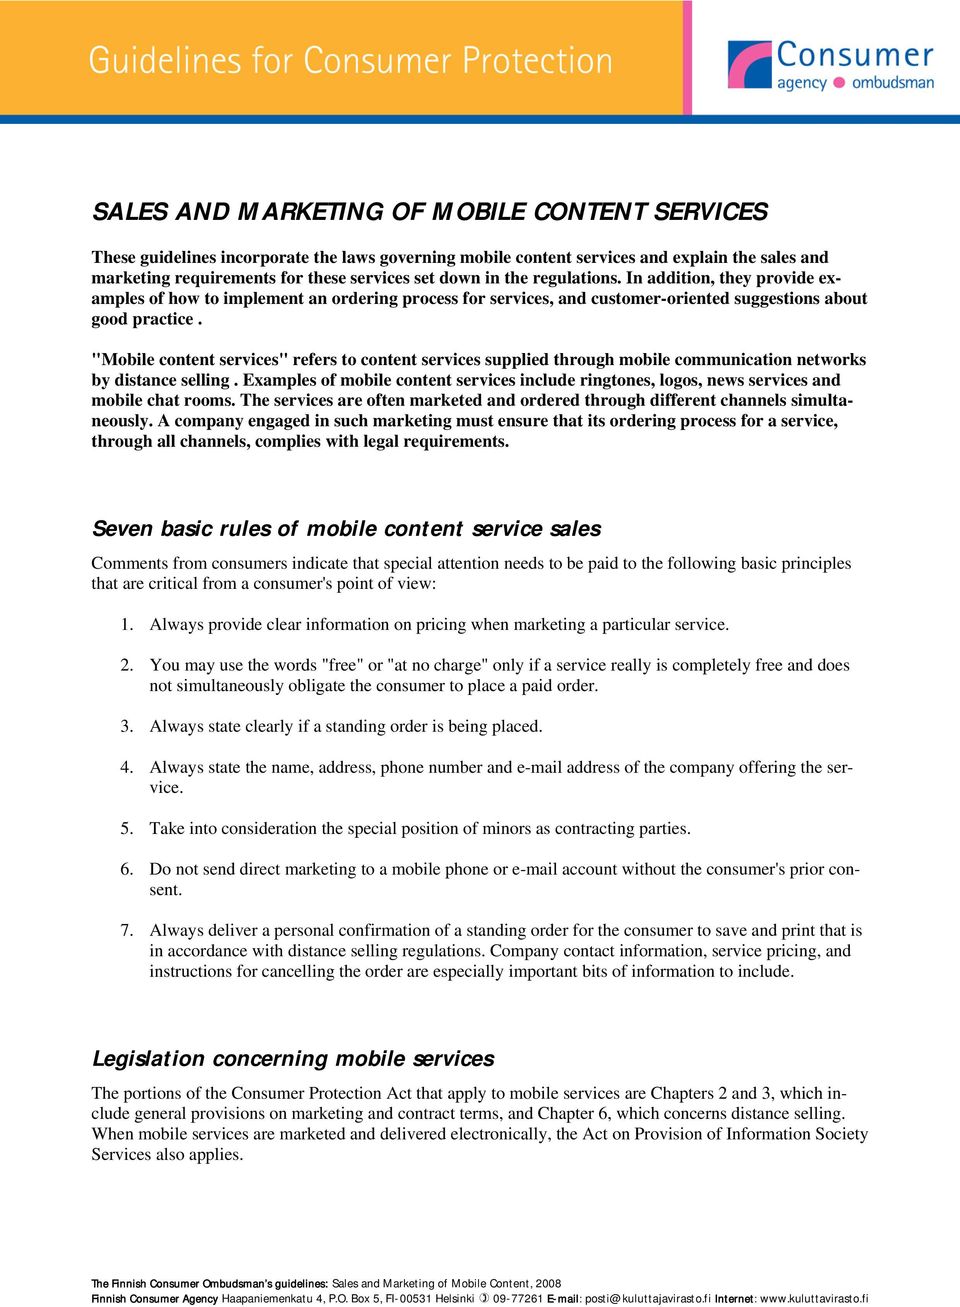 "Mobile content services" refers to content services supplied through mobile communication networks by distance selling.